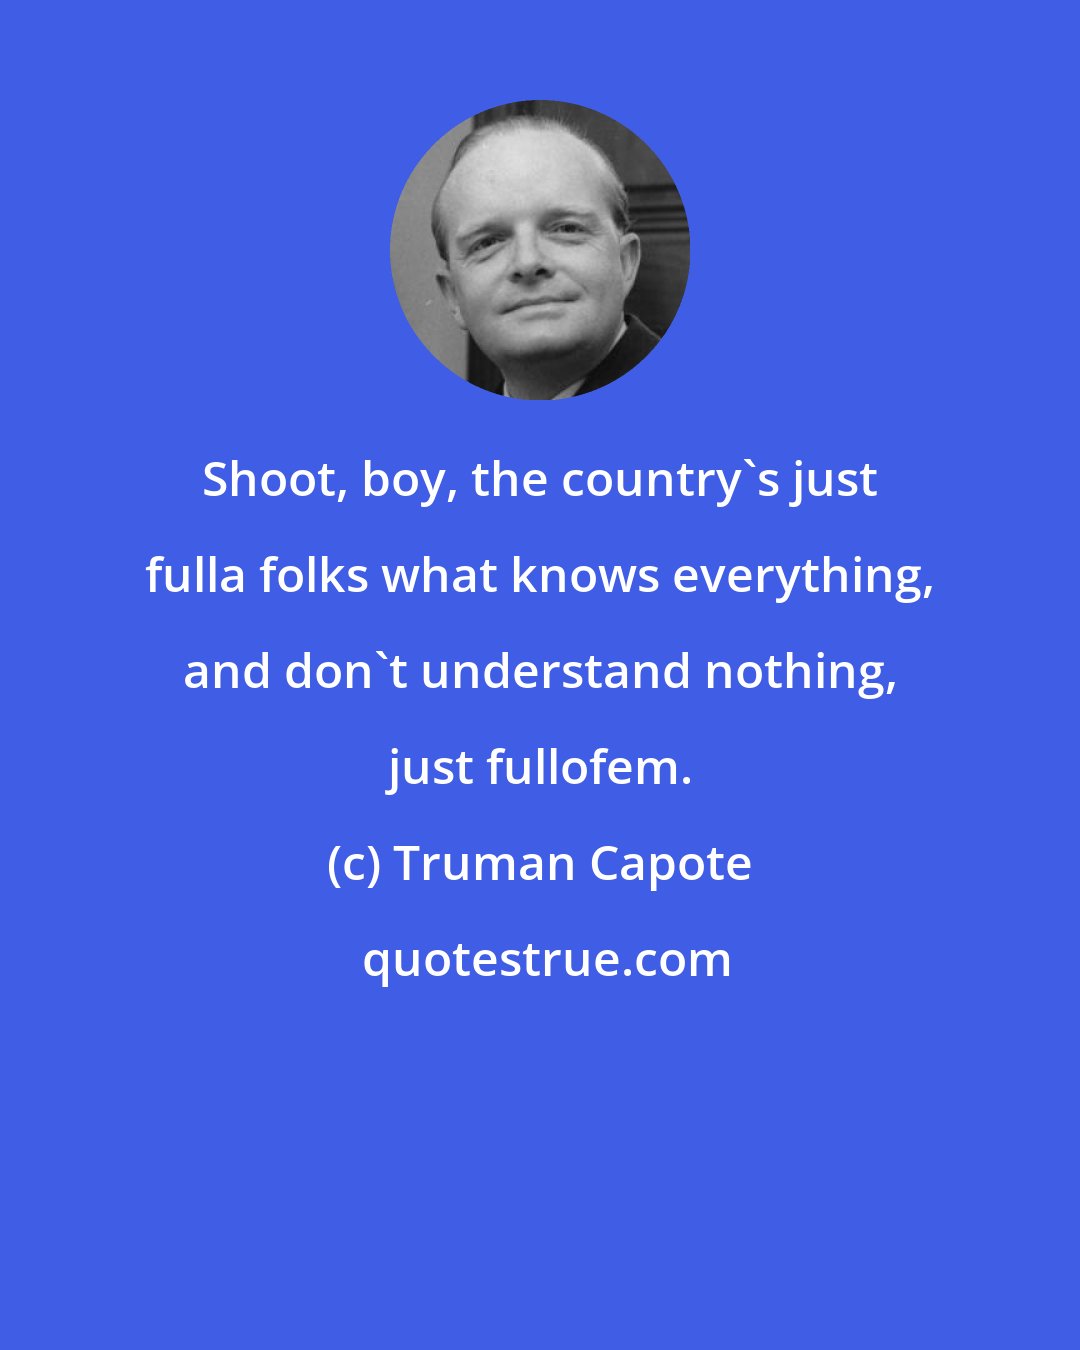 Truman Capote: Shoot, boy, the country's just fulla folks what knows everything, and don't understand nothing, just fullofem.